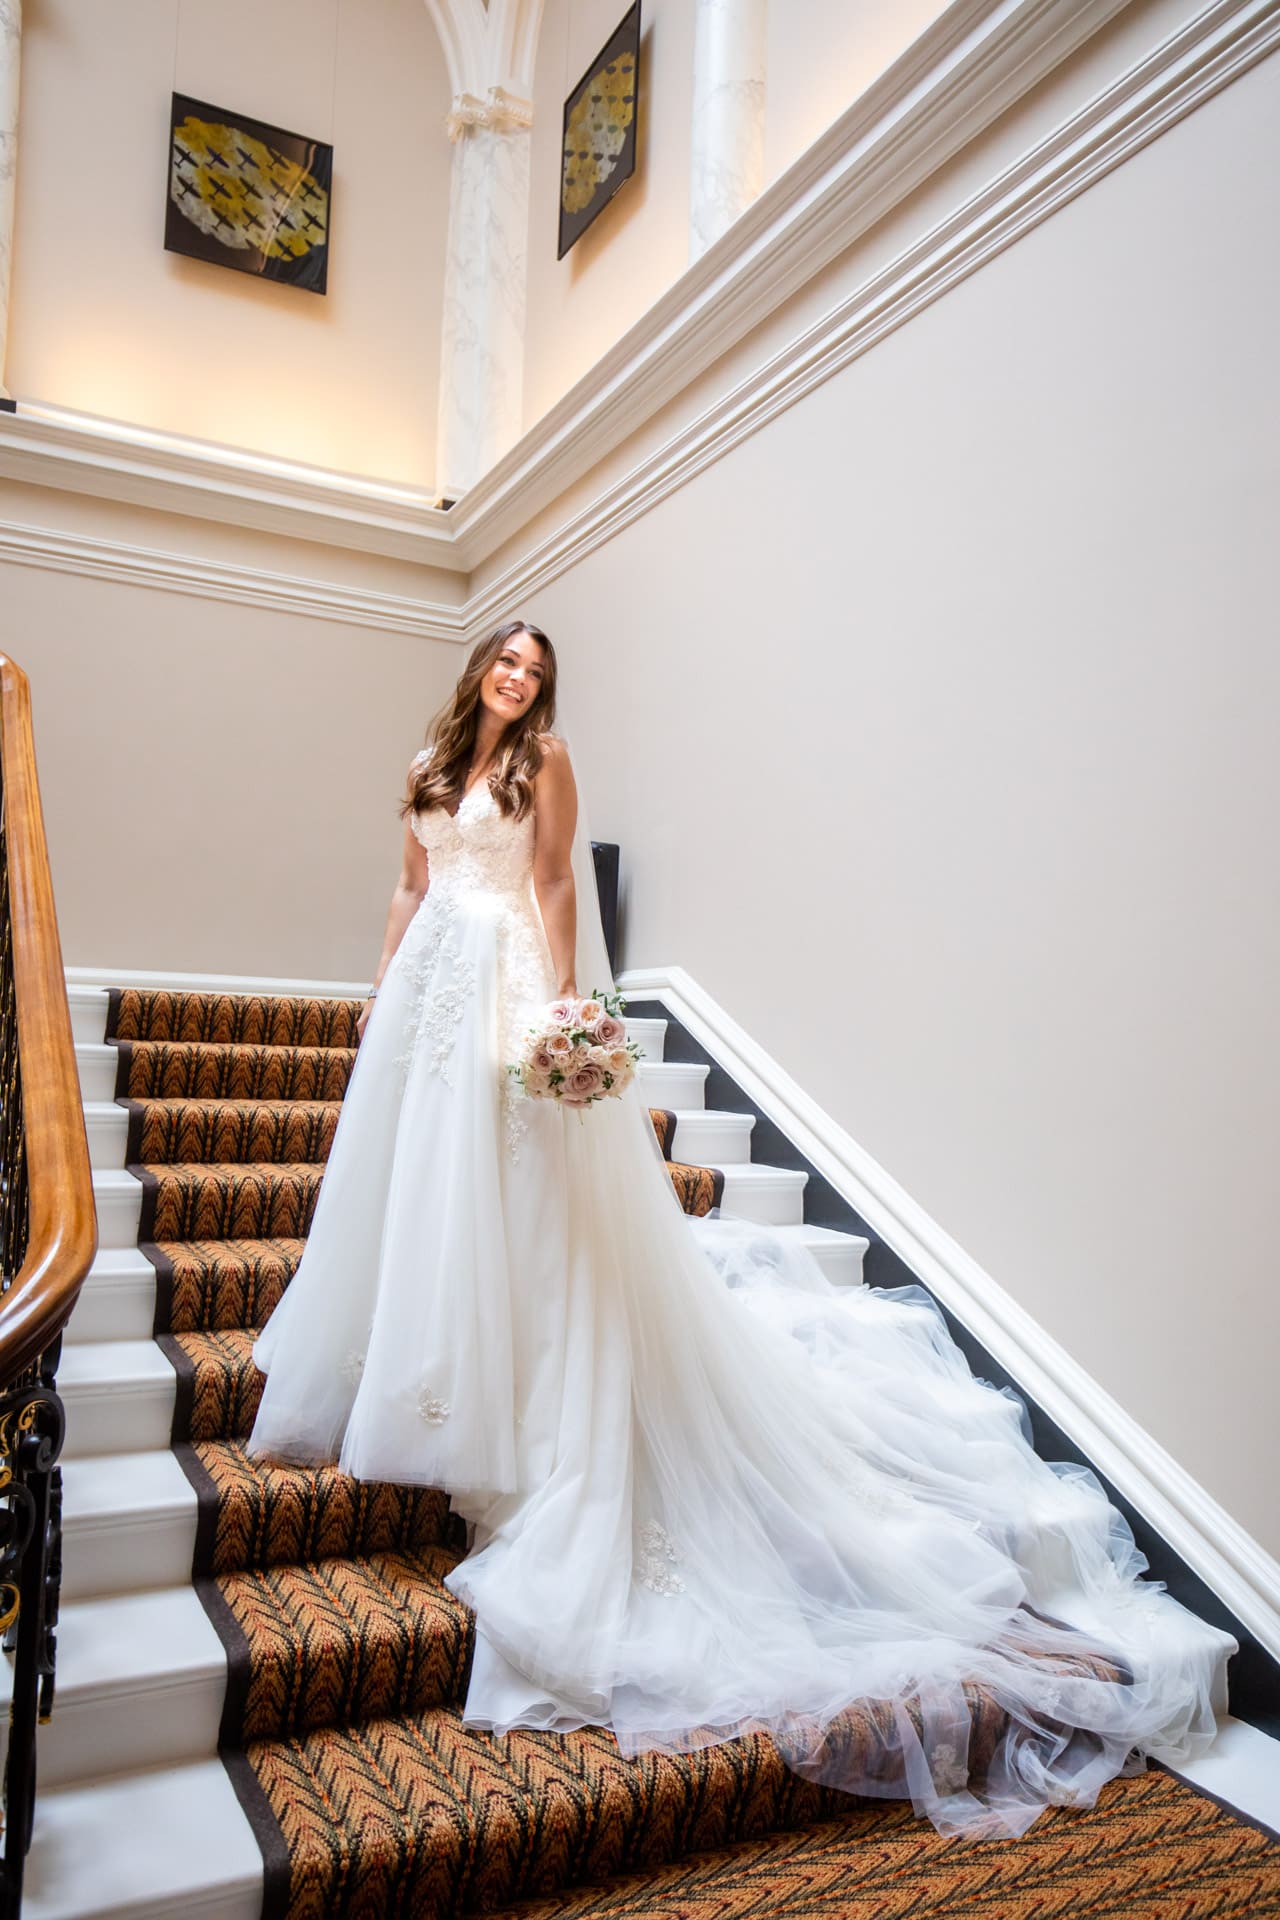 epic wedding dress on staircase